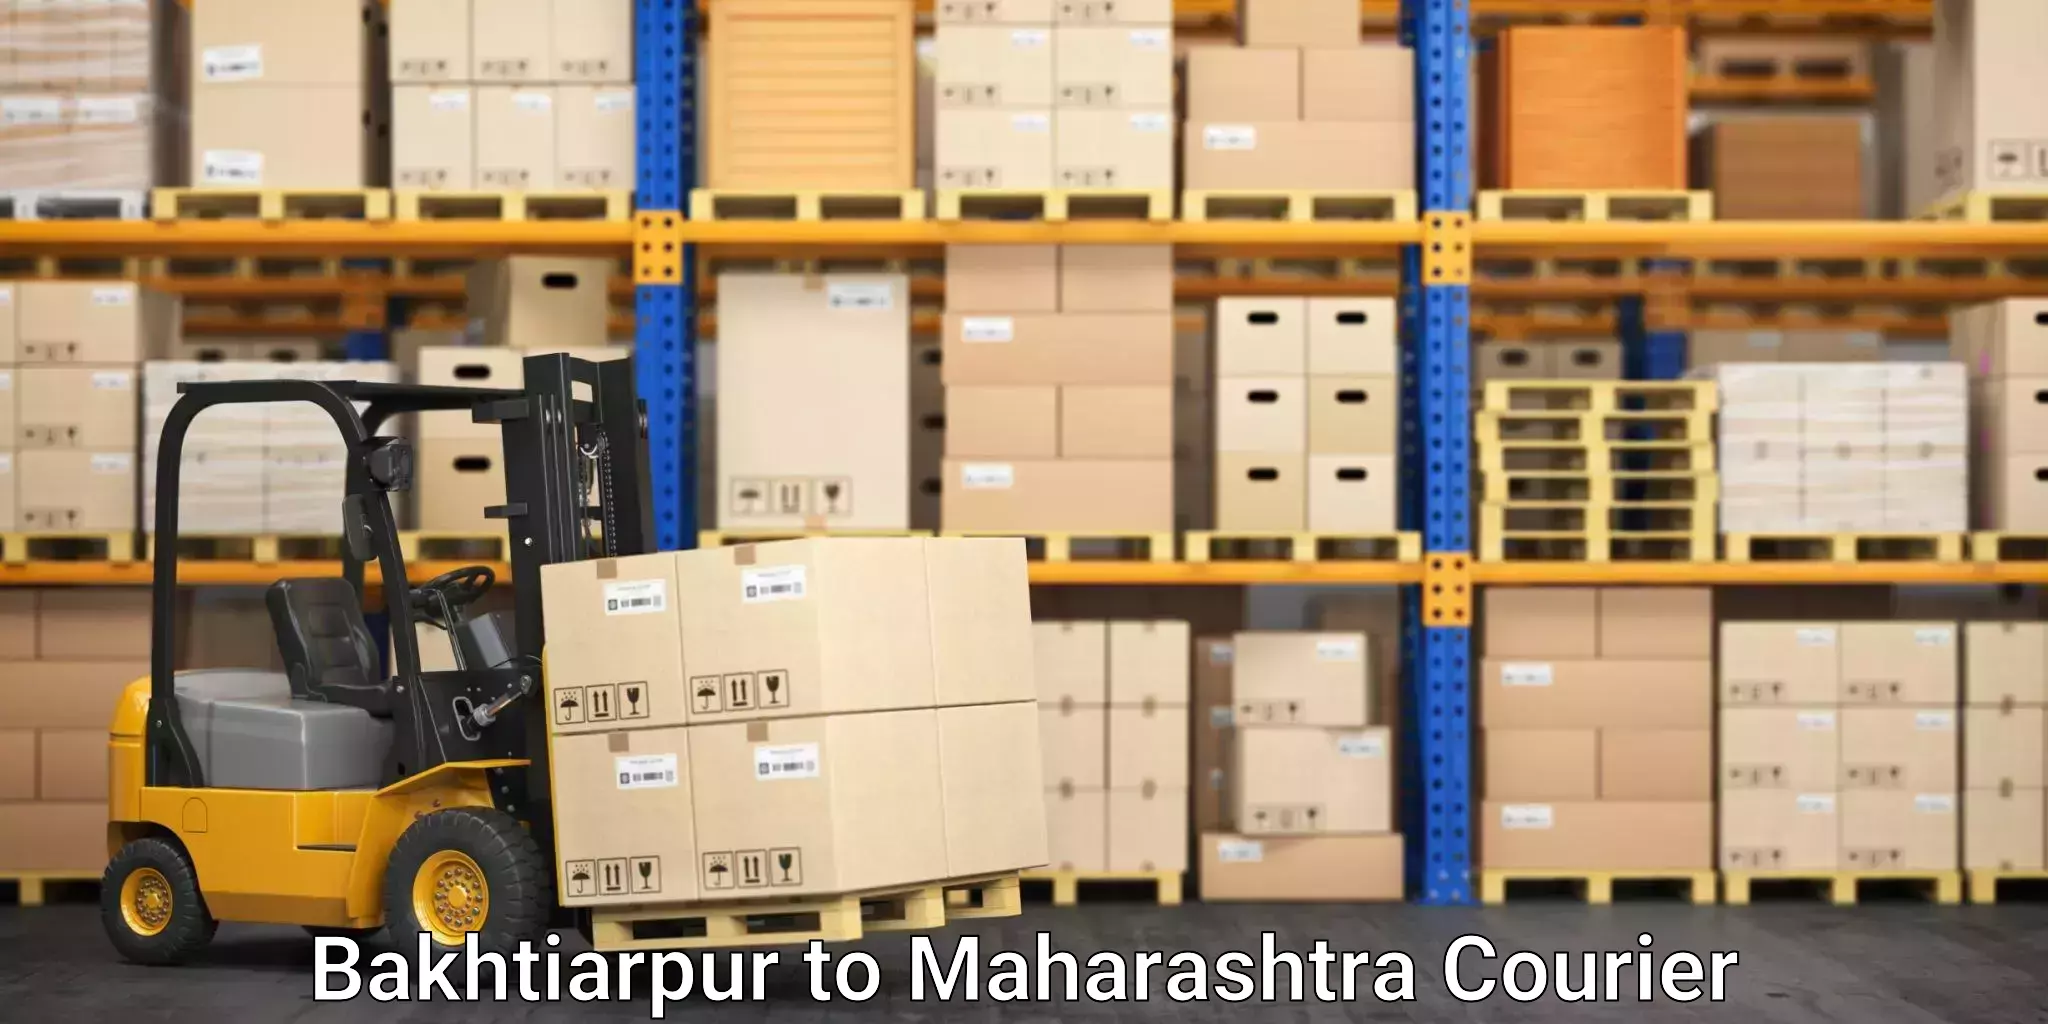 Cost-effective moving options Bakhtiarpur to Dusarbid